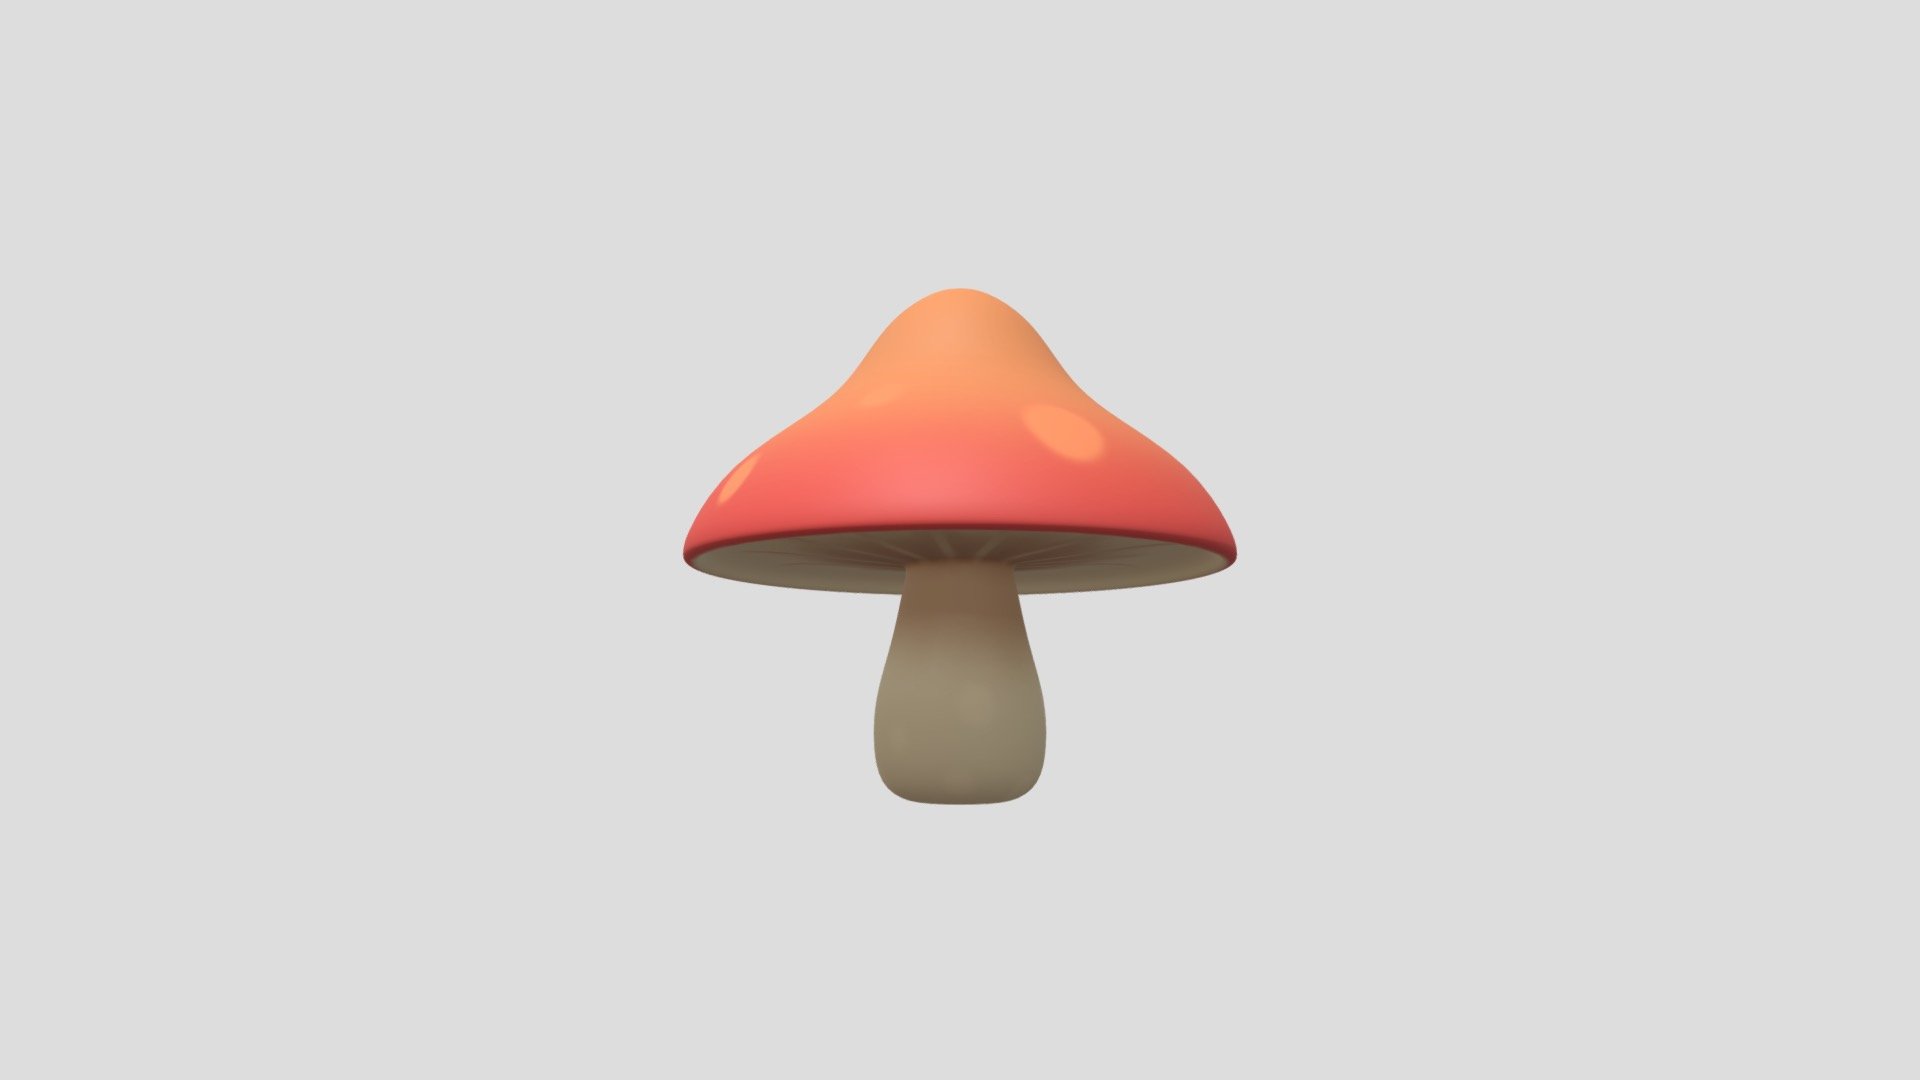 Subdivision Level: 2

Non-Mirrored.

Textures: 1024 x 1024, Multiple colors on texture.

Materials: 1 - Mushroom.

Shapes: Shape1, Shape2, Shape3 

Formats: .stl .obj .fbx .dae

Origin located on bottom-center

Polygons: 29184

Vertices: 14594

I hope you enjoy the model! - Mushroom - Buy Royalty Free 3D model by Ed+ (@EDplus) 3d model